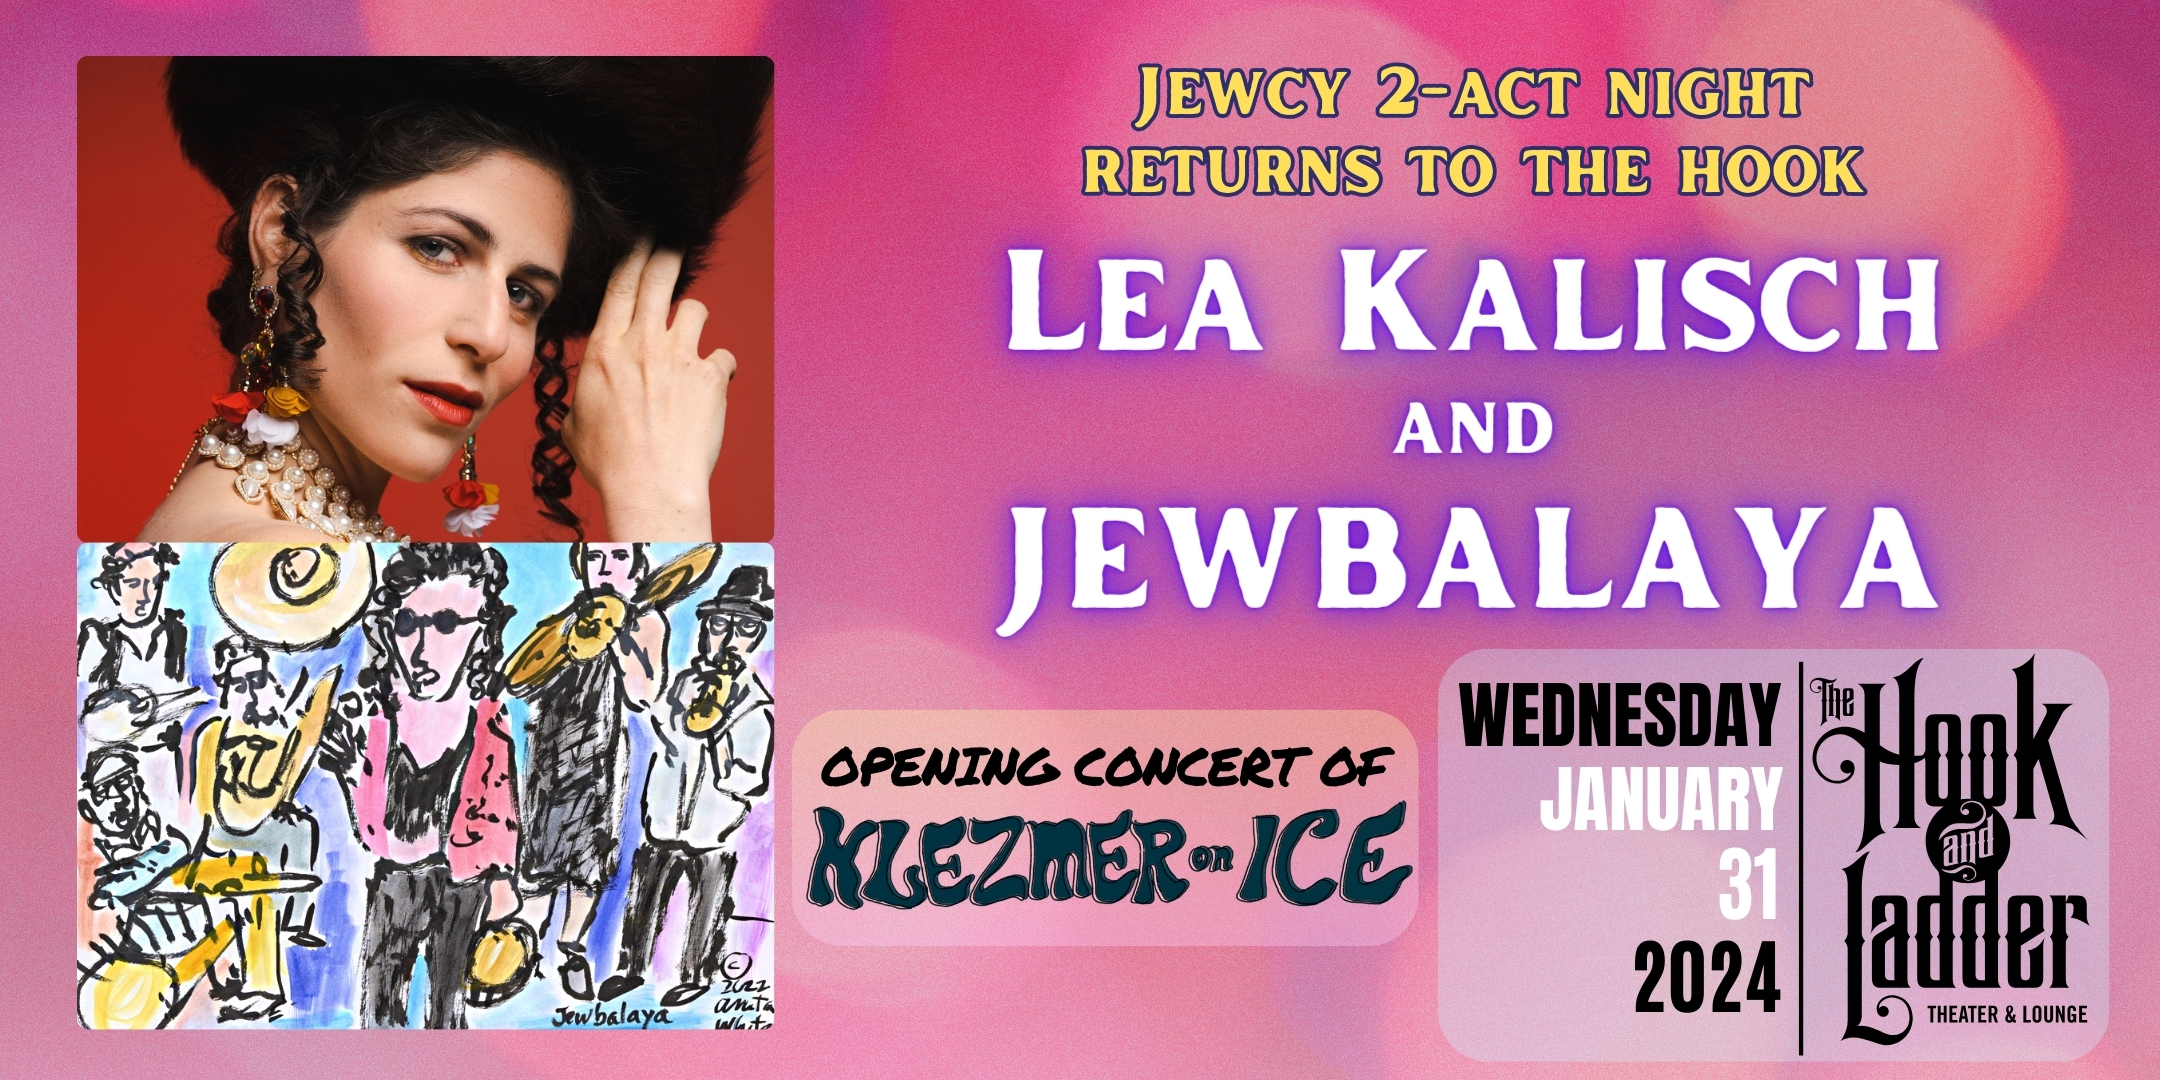 Lea Kalisch & JEWBALAYA - Opening Concert of 'Klezmer On Ice' Wednesday, January 31 The Hook and Ladder Theater Doors 6:30pm :: Music 7:00pm GA Seat: $28* Standing Room Only: $22 ADV / $28 DOS *Seating Available On A First-come First-served Basis NO REFUNDS